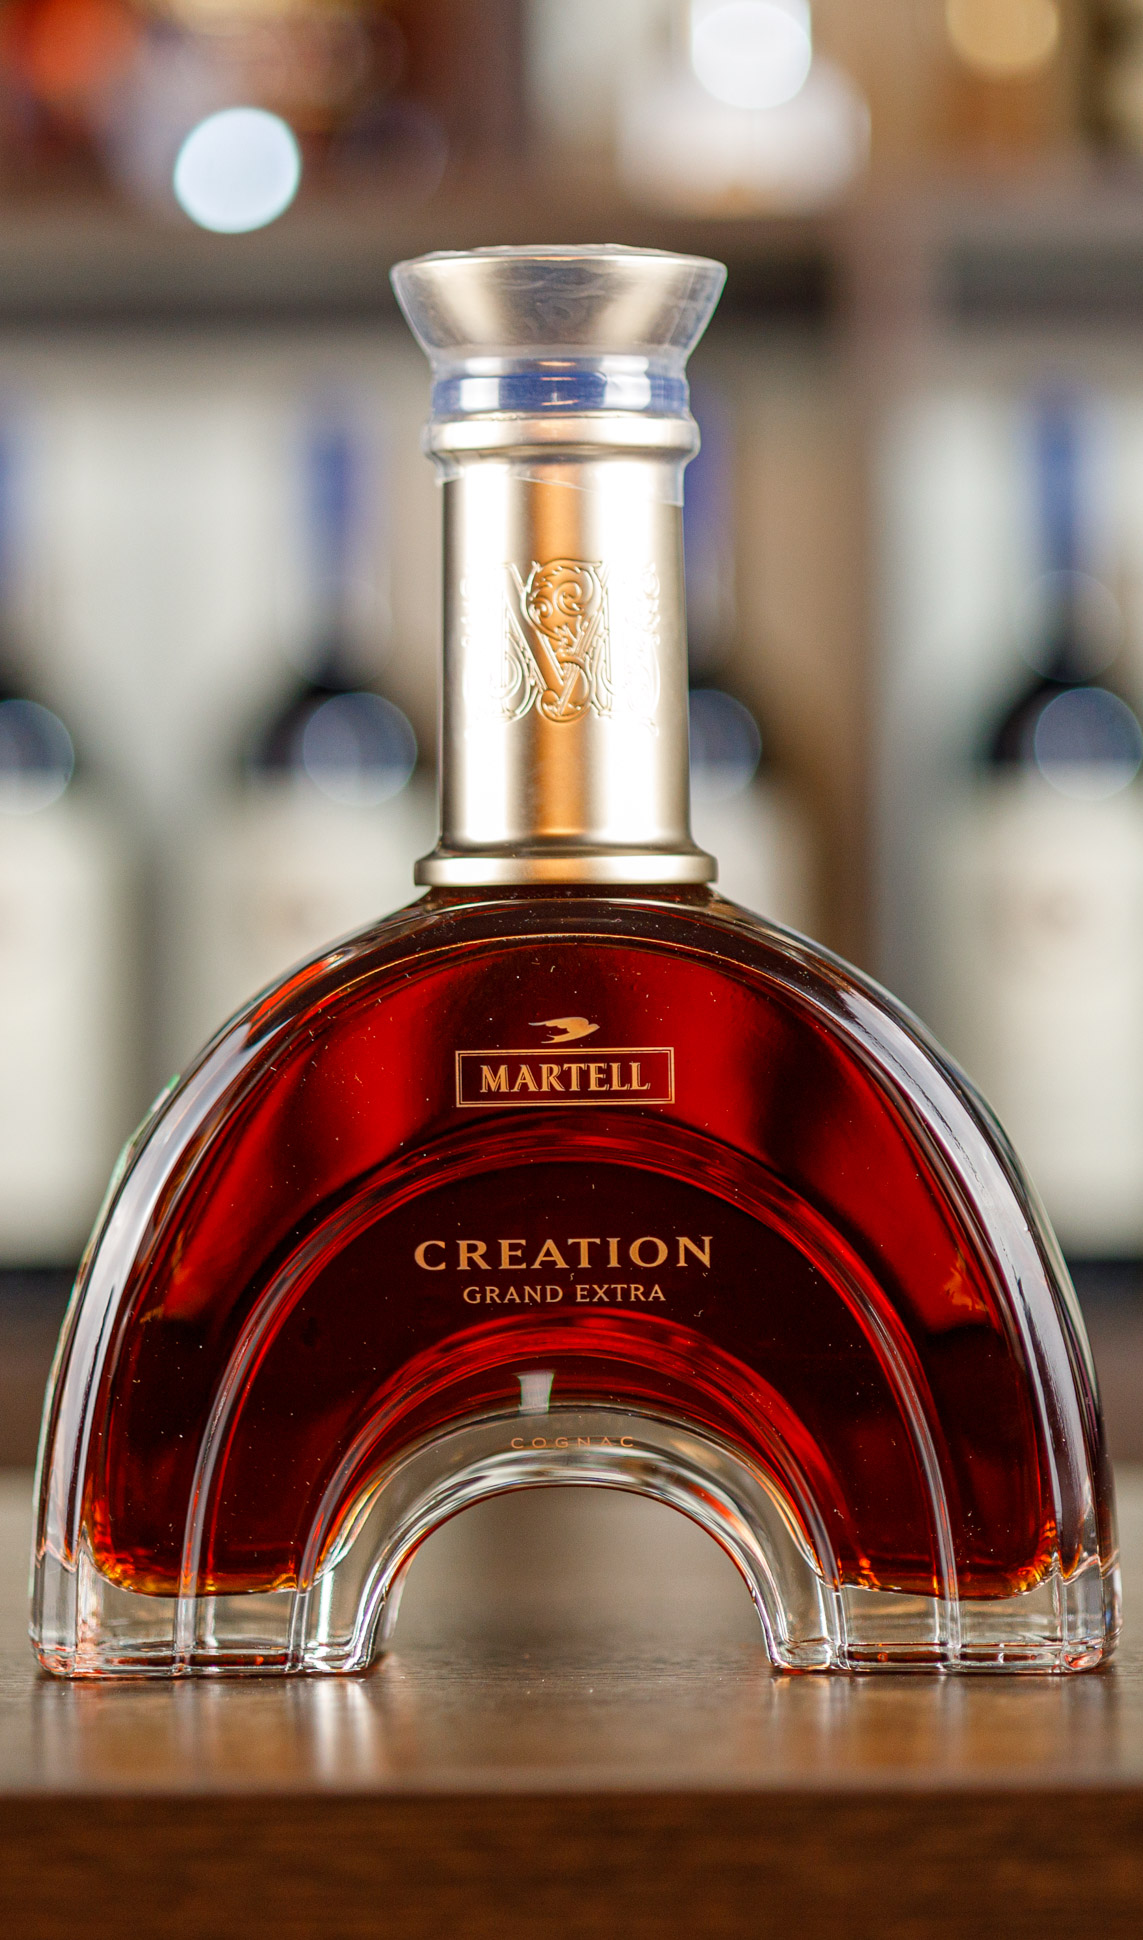 Martell Grand Extra Creation